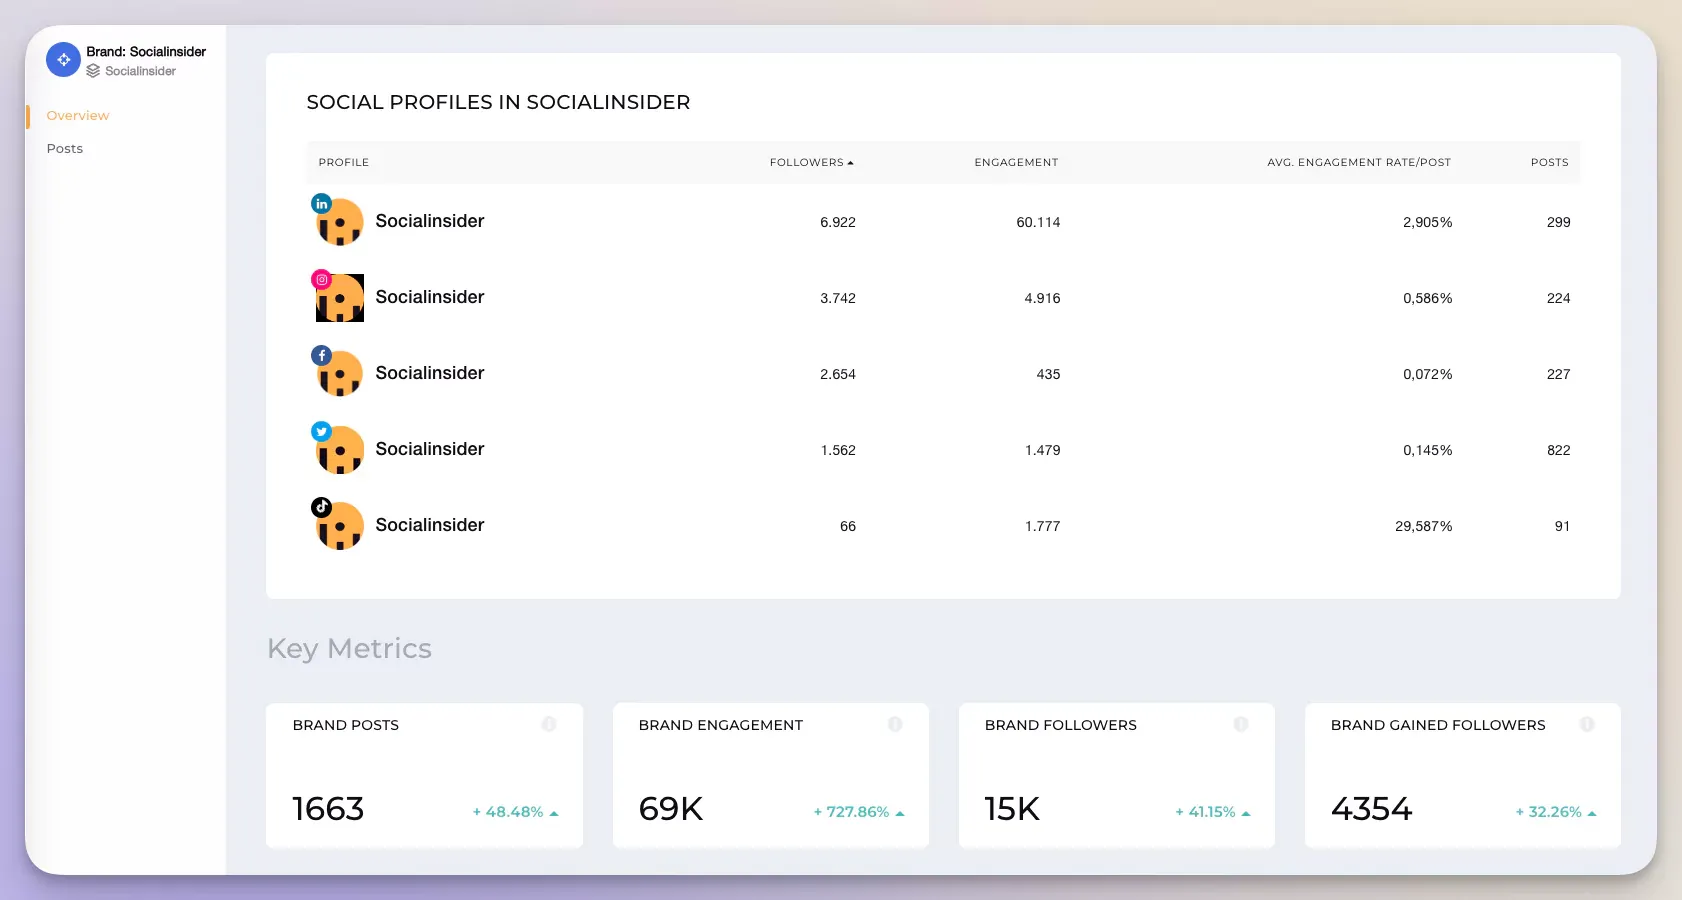 Here's a screenshot from Socialinsider's dashboard where you can conduct a brand audit